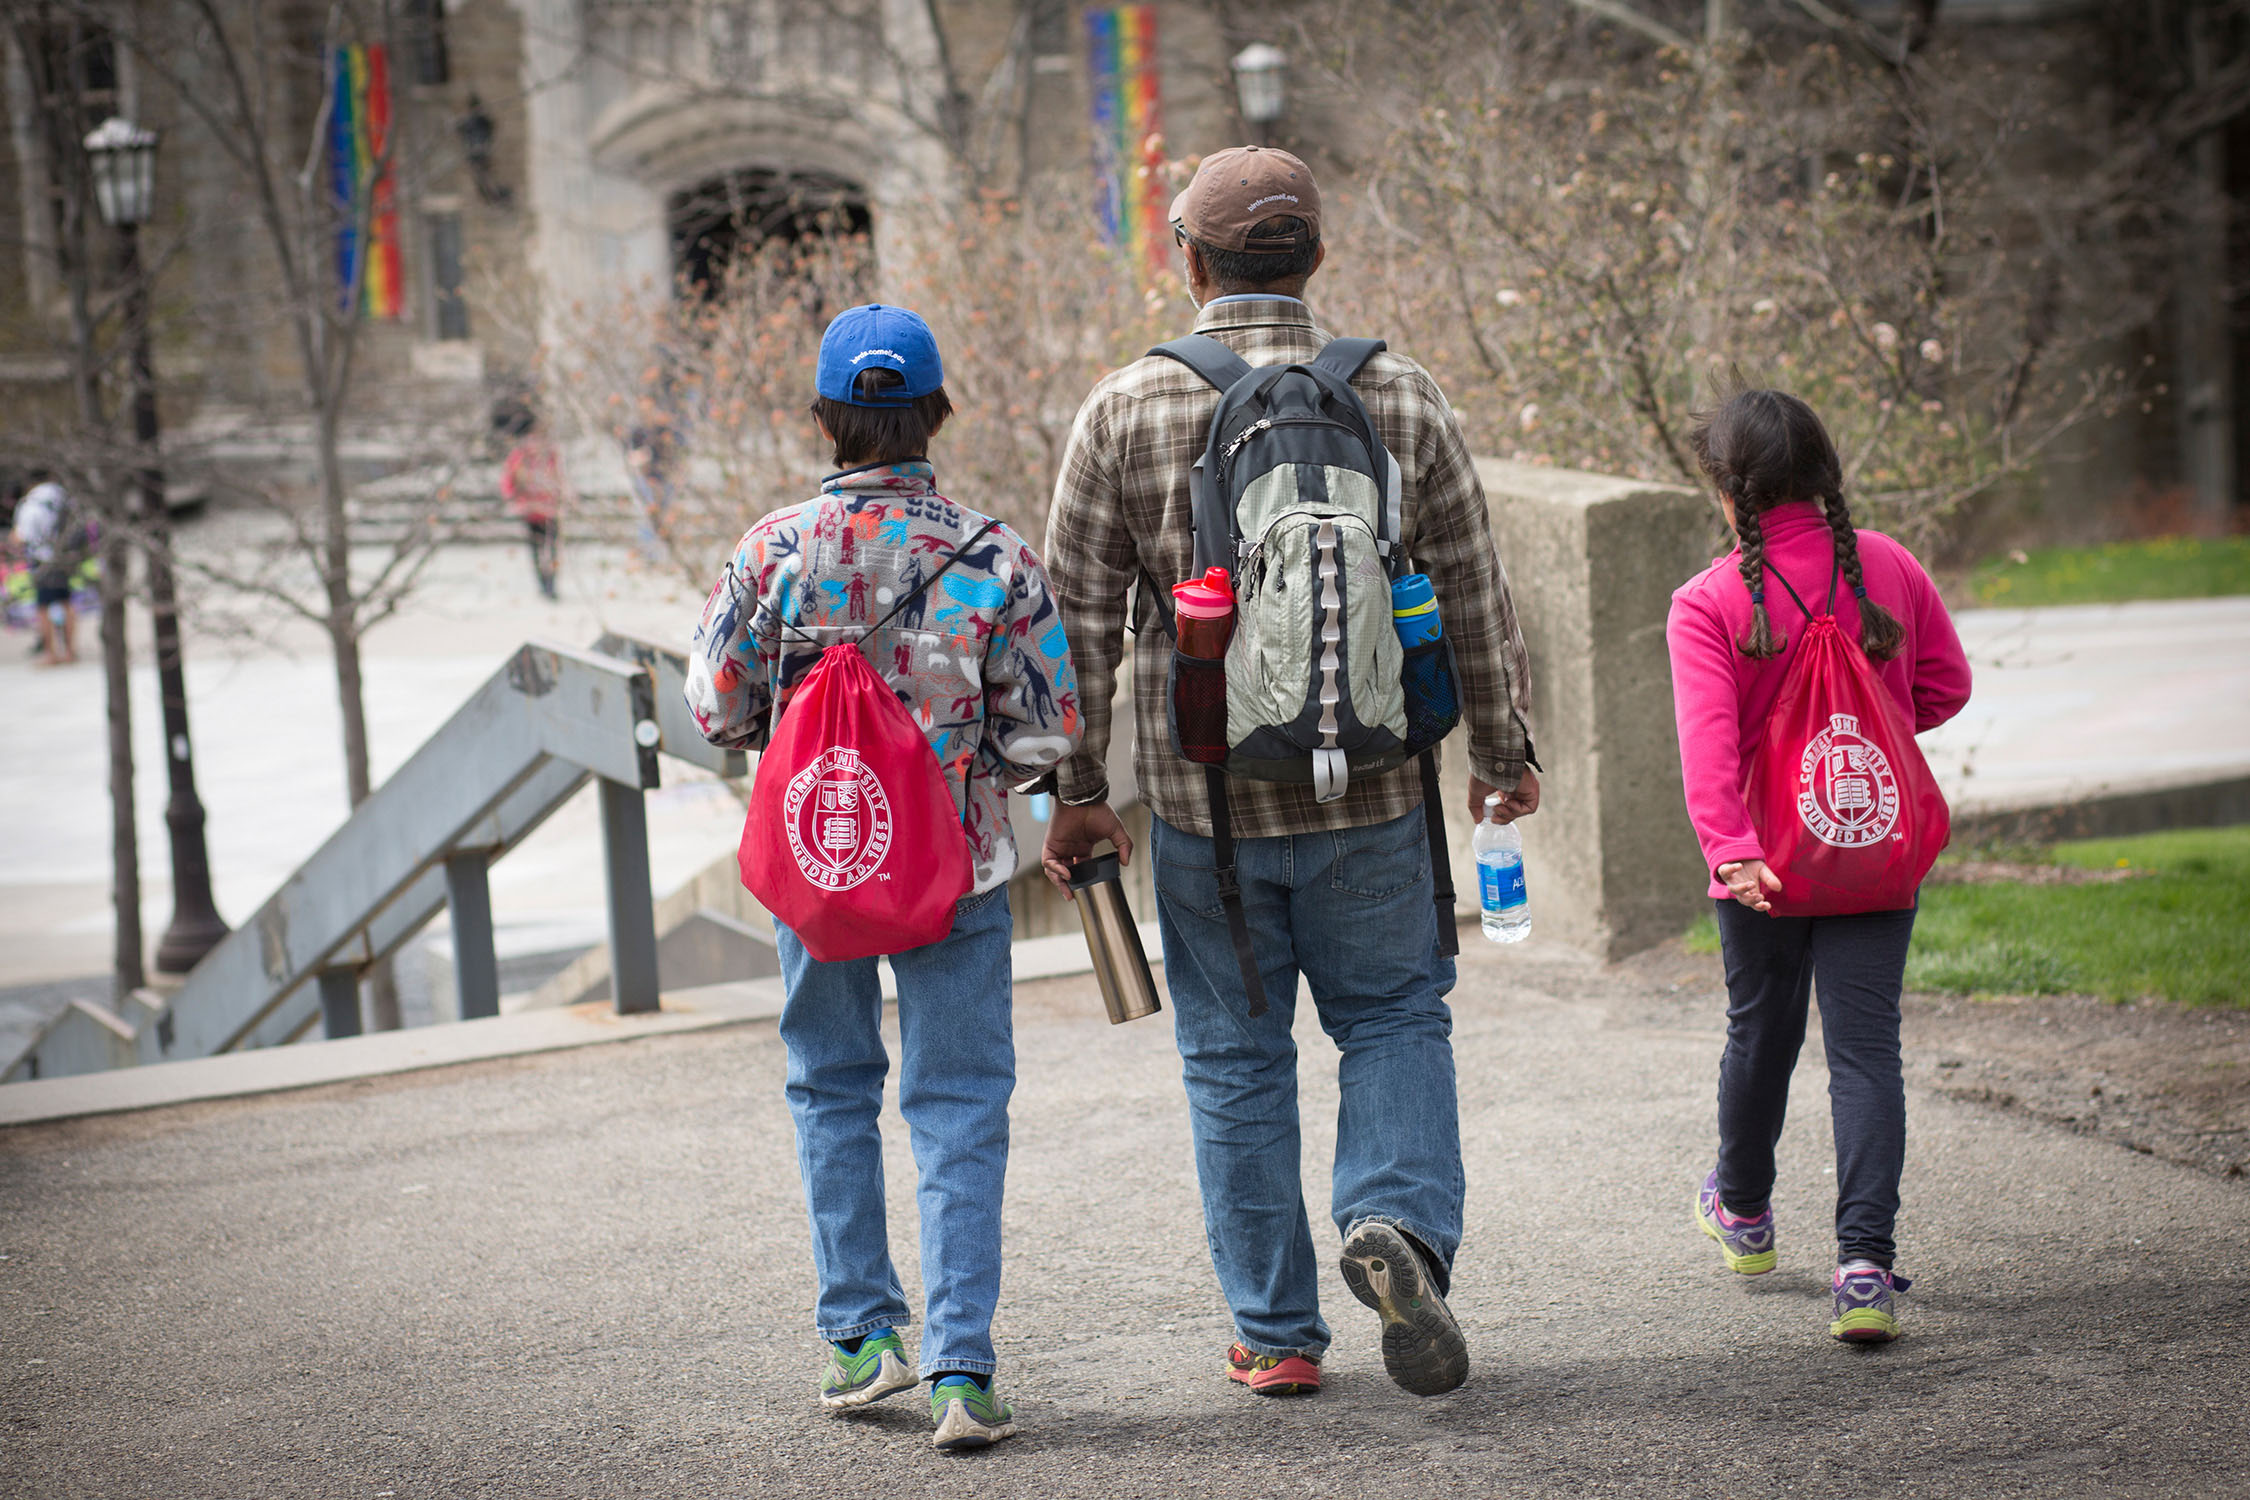 Parent with two young children wearing Cornell backpacks